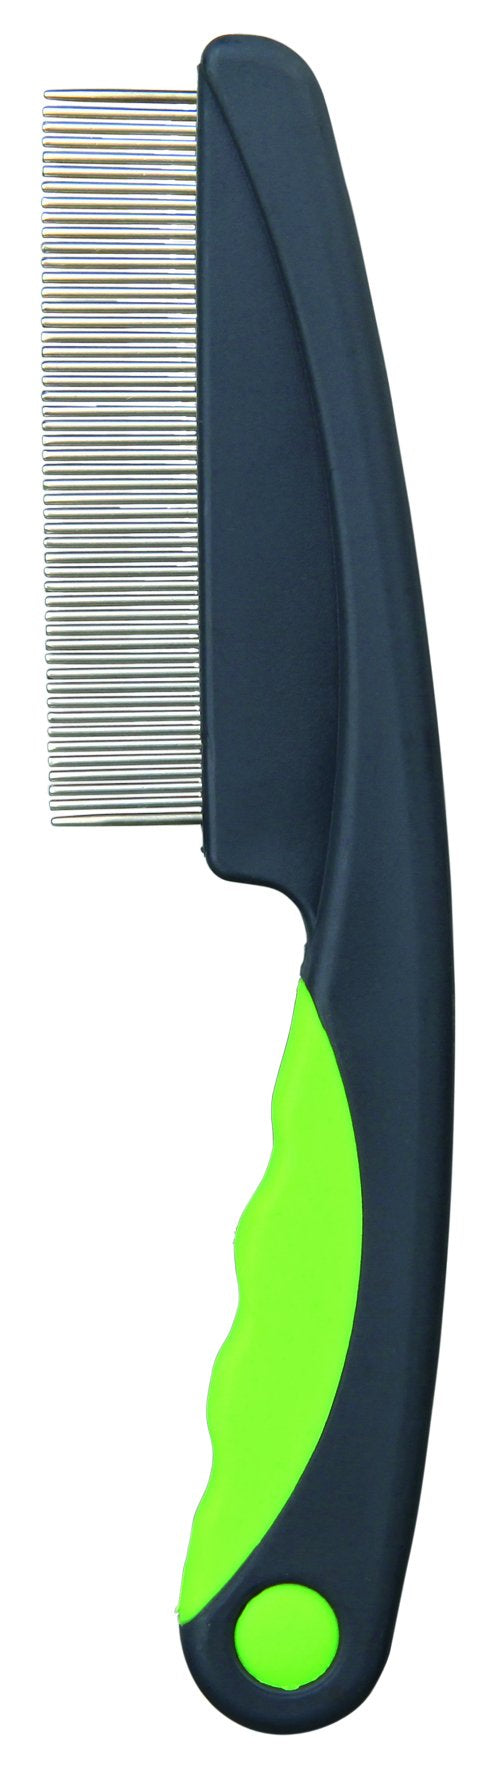 6287 Flea and dust comb for small animals, 15 cm, green